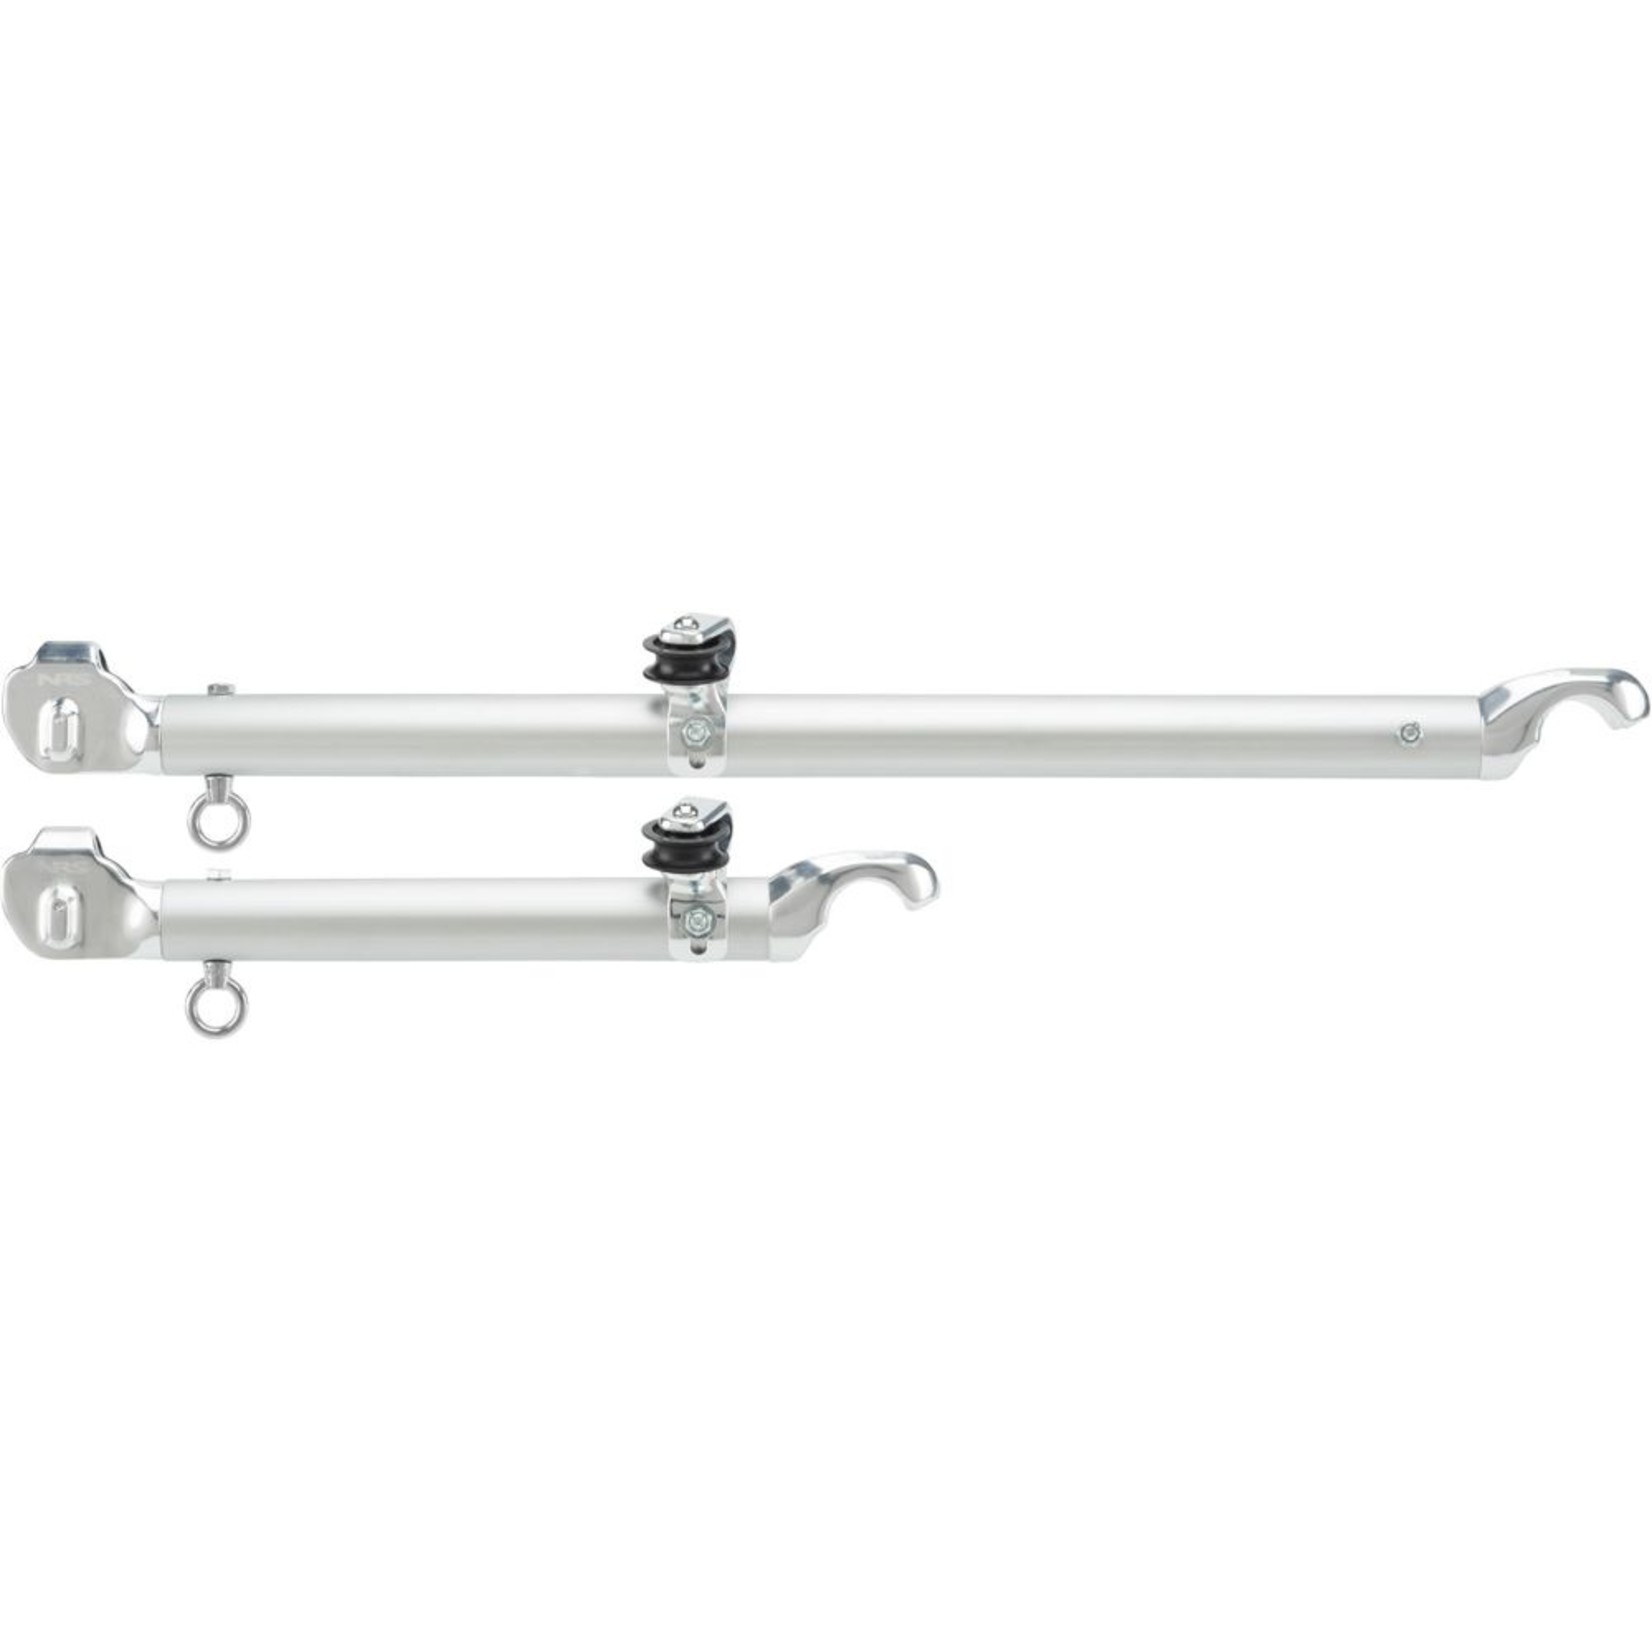 NRS, Inc NRS Frame Anchor System with 2:1